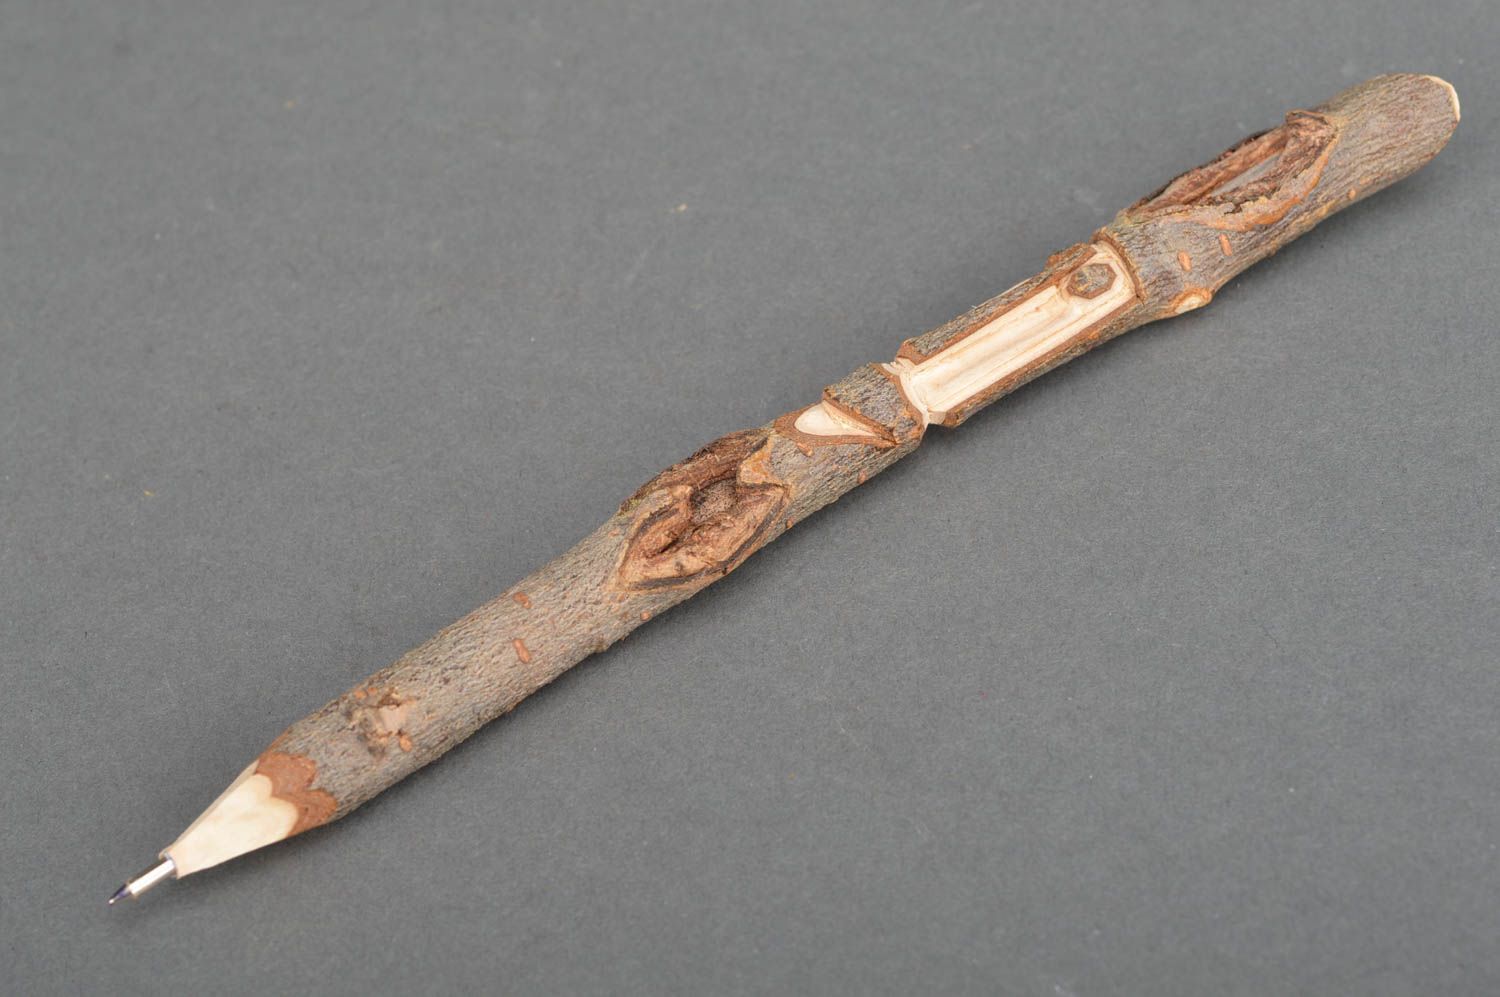 Handmade cute designer pen in eco style made of natural materials present photo 1